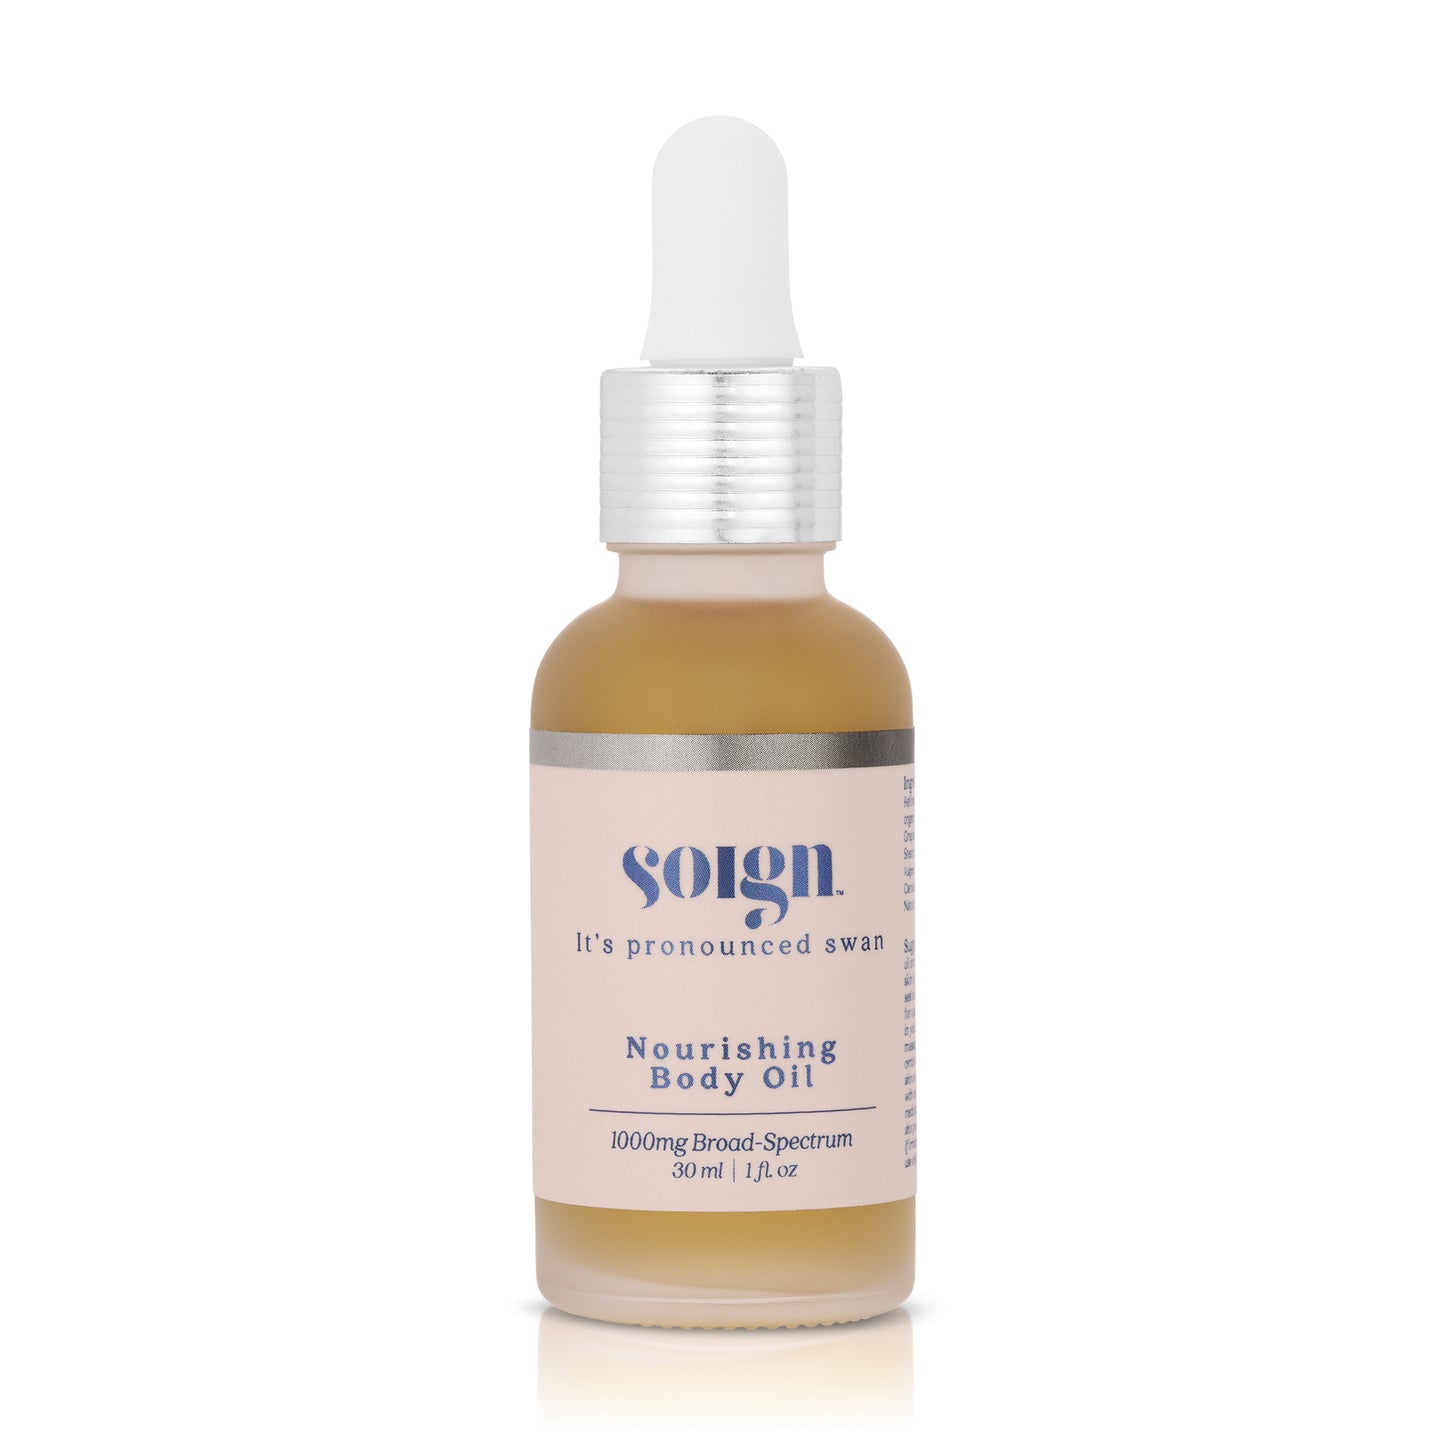 Nourishing Body Oil for arthritis and pain relief.